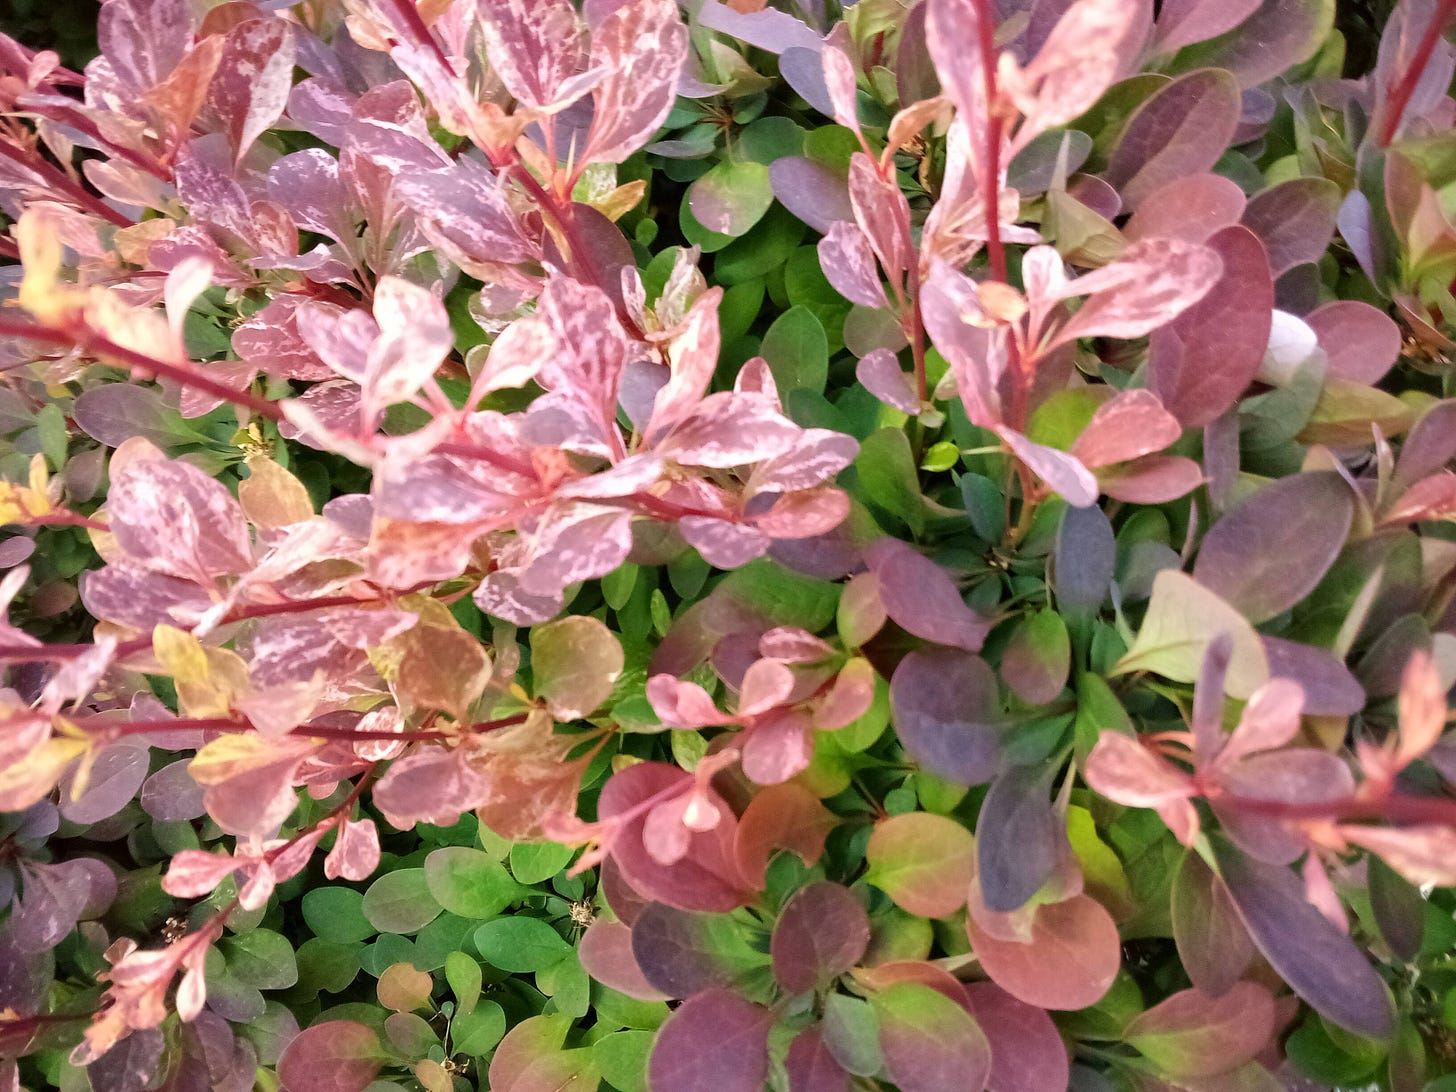 Green, red, and purple foliage